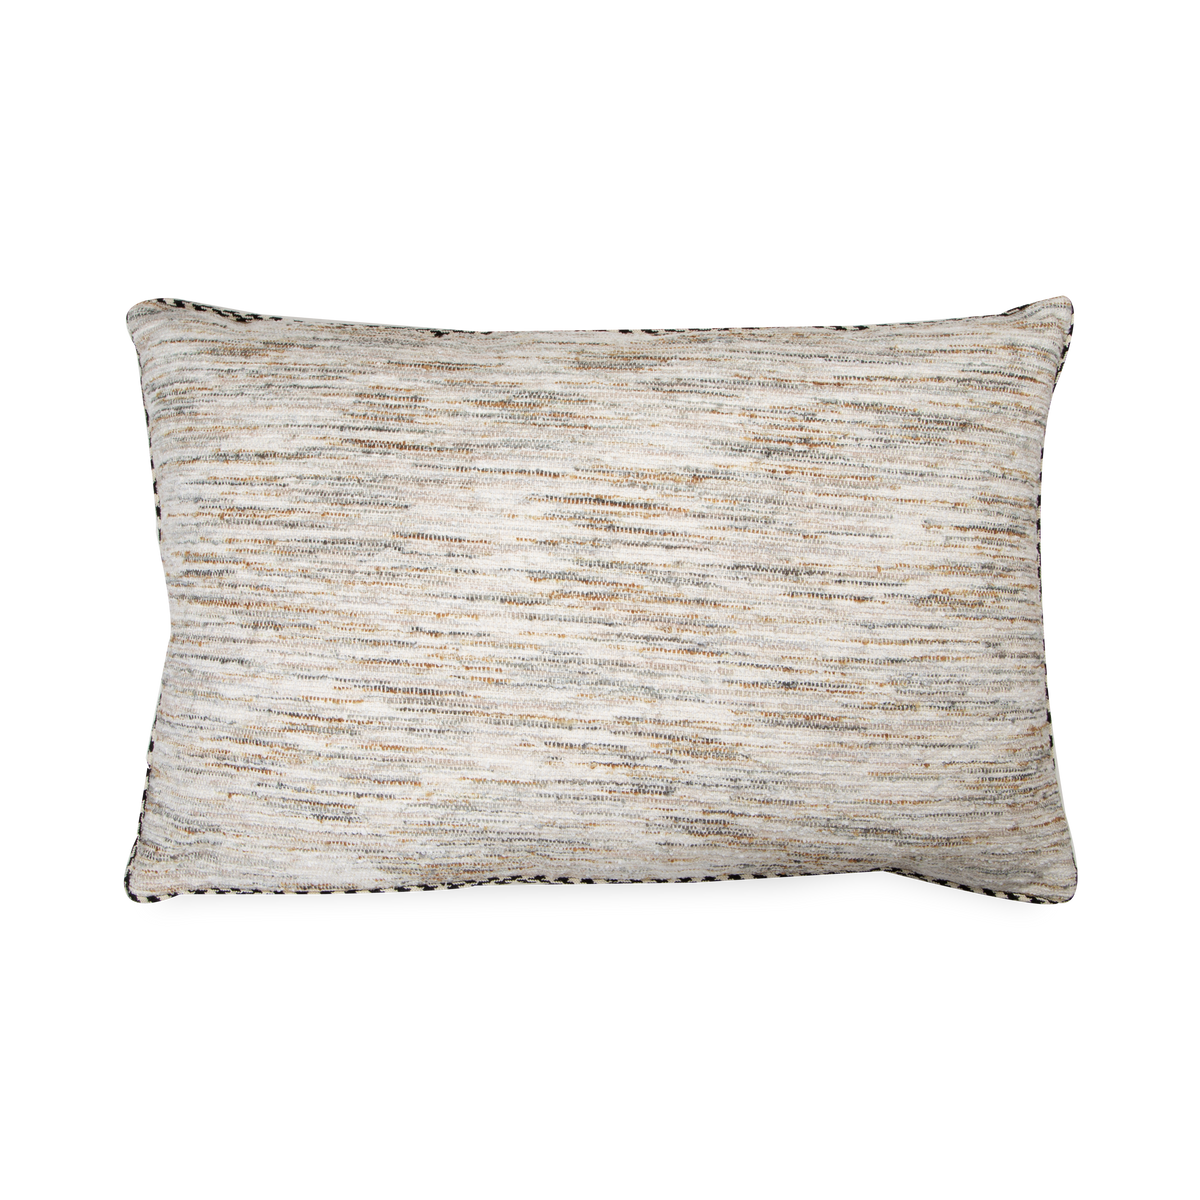 With the use of brief, paintbrush-like strokes, the Textured Piping Pillow plays with a sense of movement and depth.